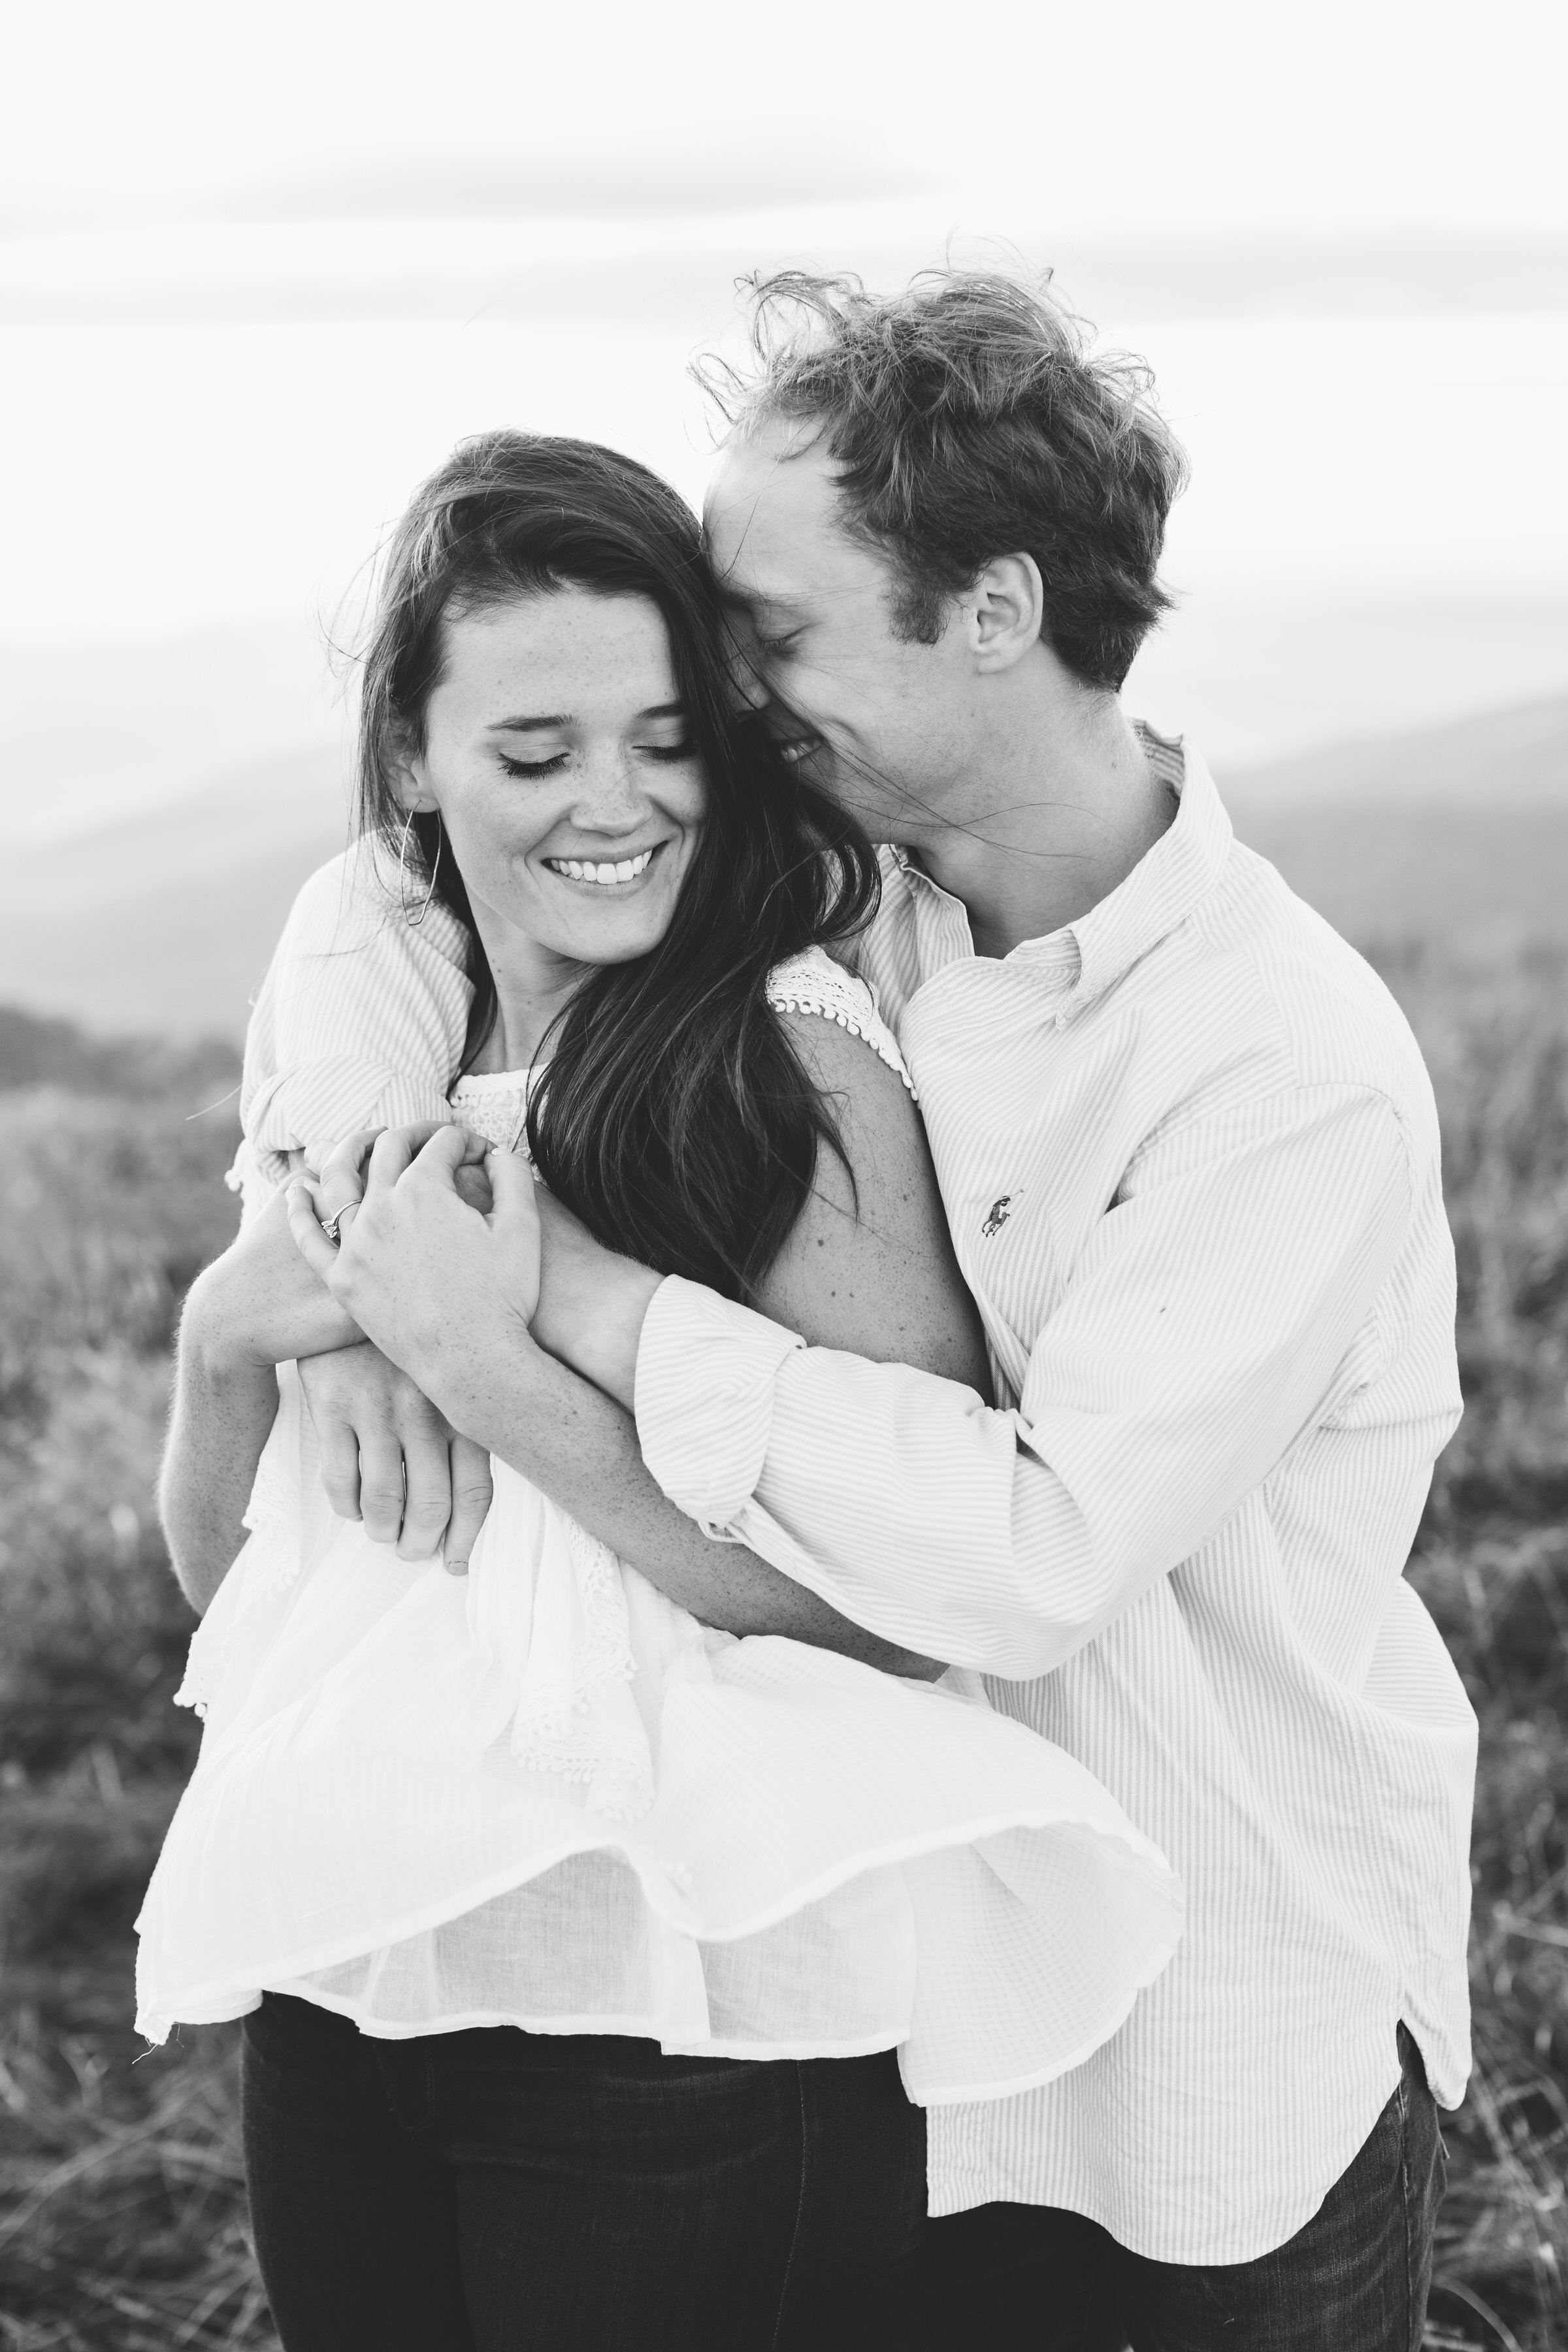 Max Patch Summer Engagement Photos on the Mountain at Sunset | Couple cuddling